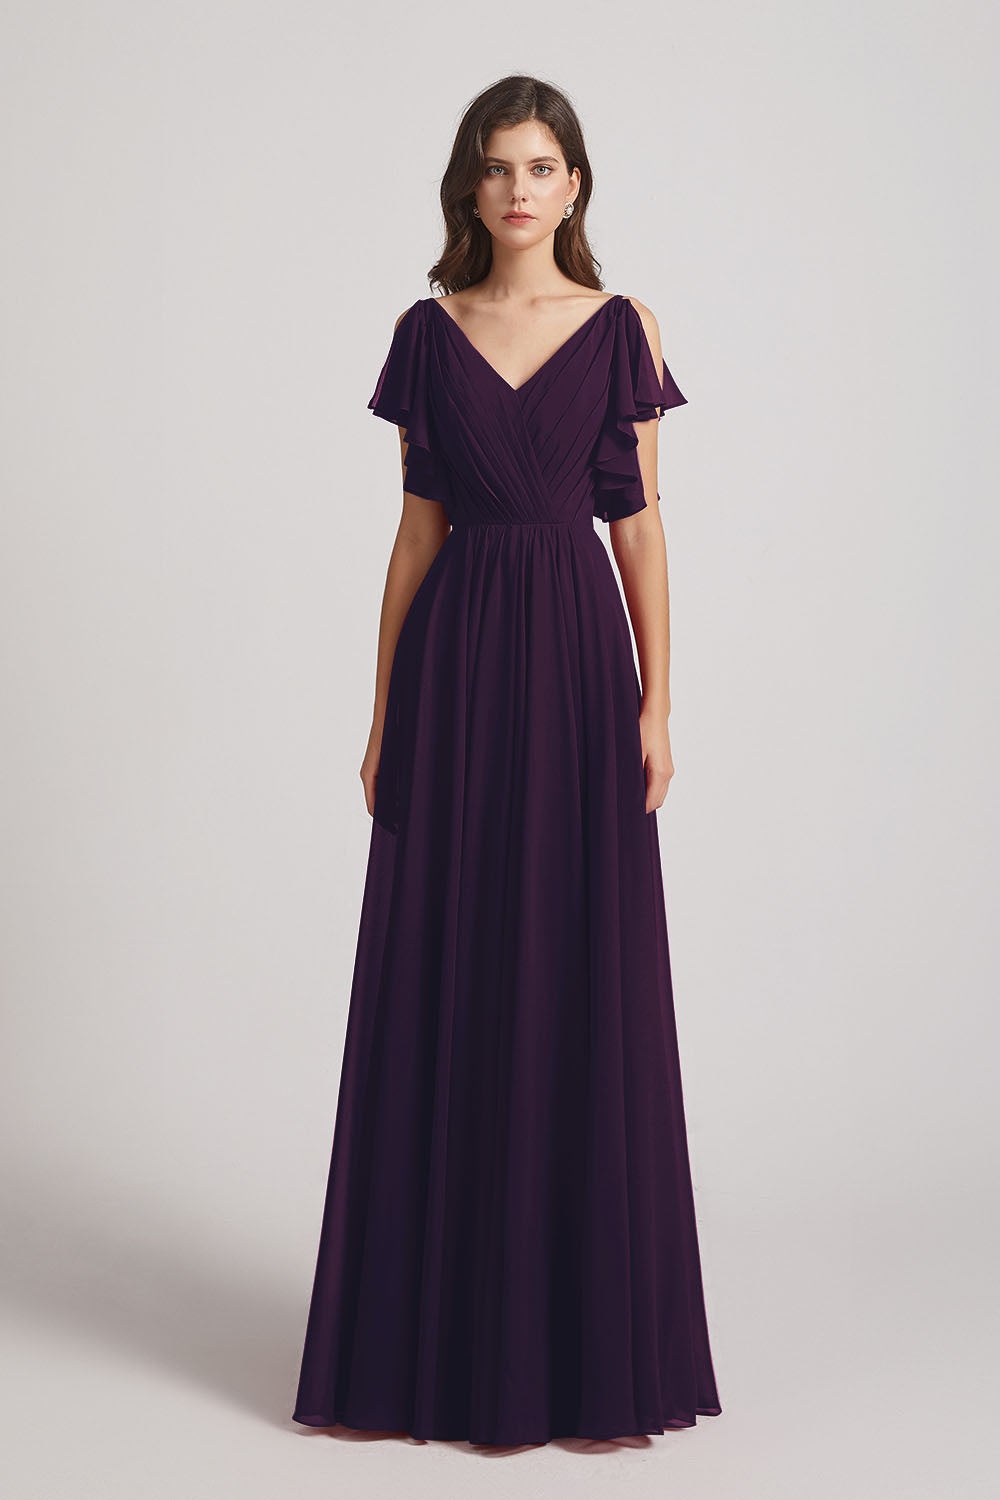 Alfa Bridal Grape V-Neck Pleated Chiffon Bridesmaid Dresses with Open Flutter Sleeves (AF0098)